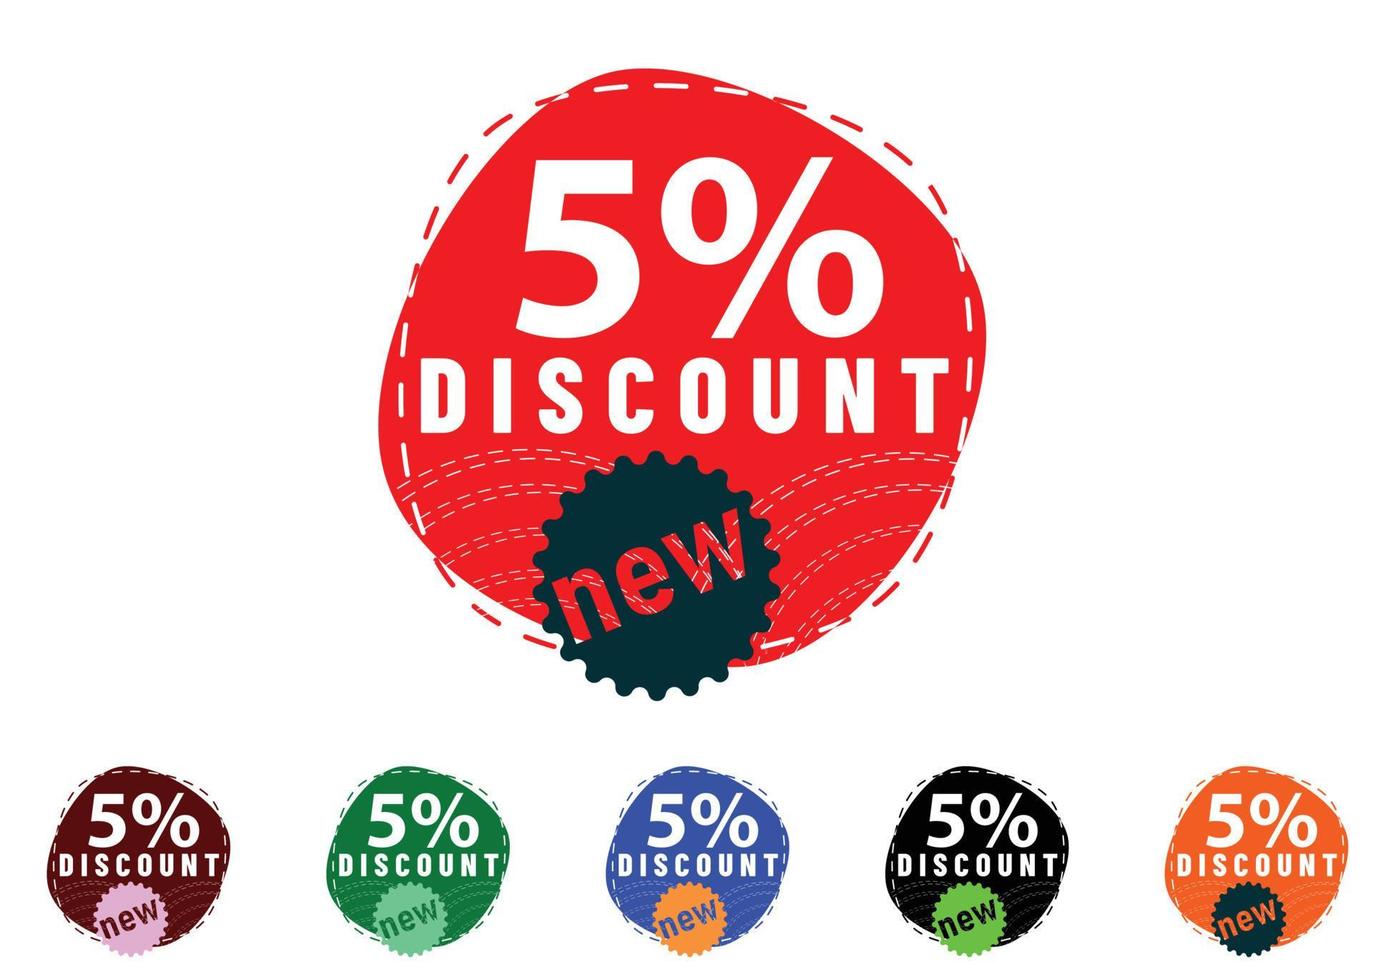 5 percent discount new offer logo and icon design vector